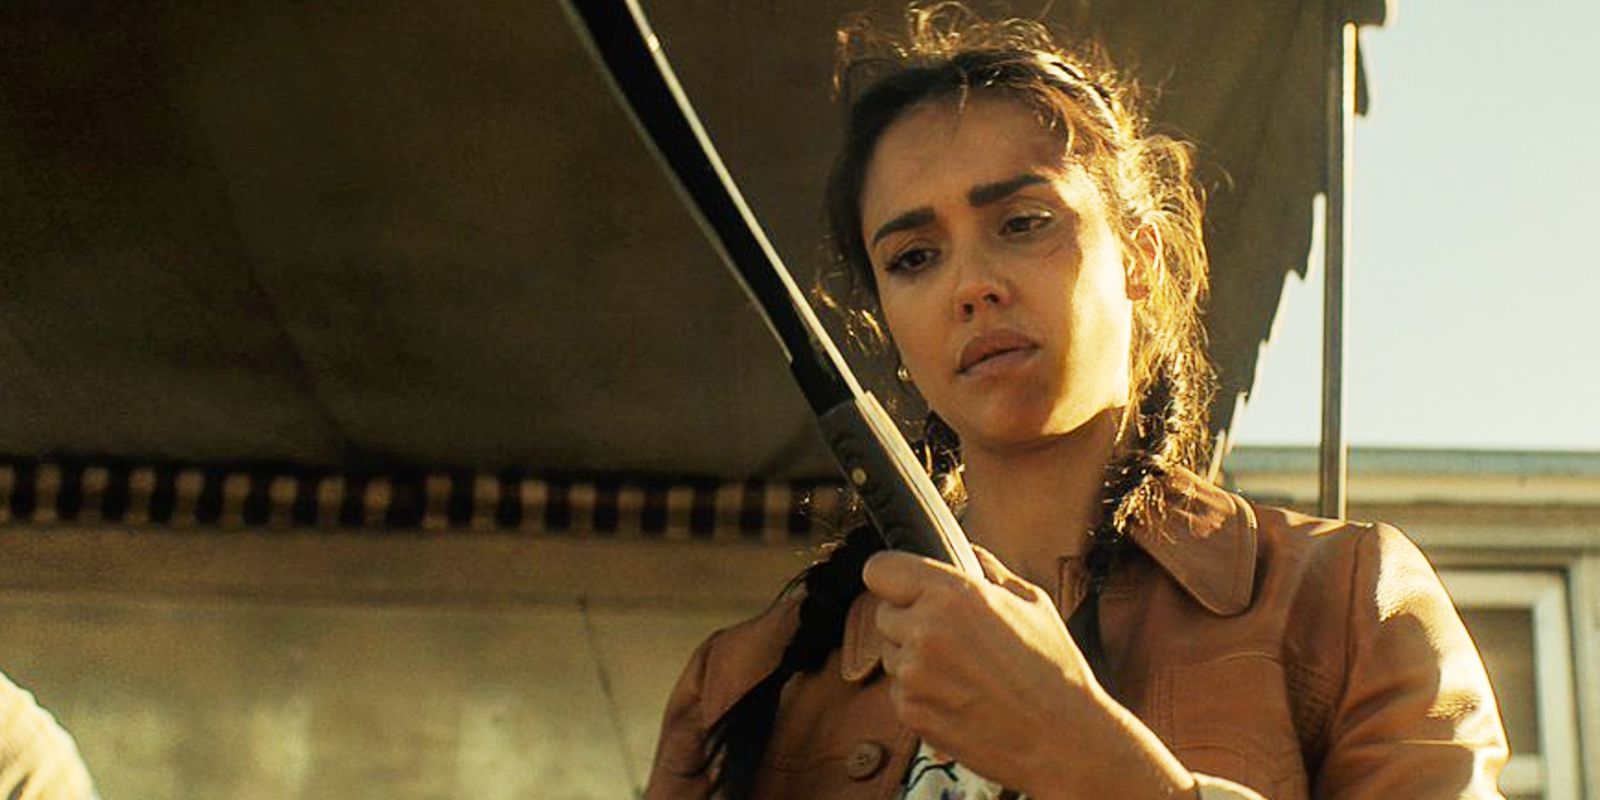 Jessica Albas New Movie Will Undoubtedly Redeem Her Last Action Film With 0% On Rotten Tomatoes